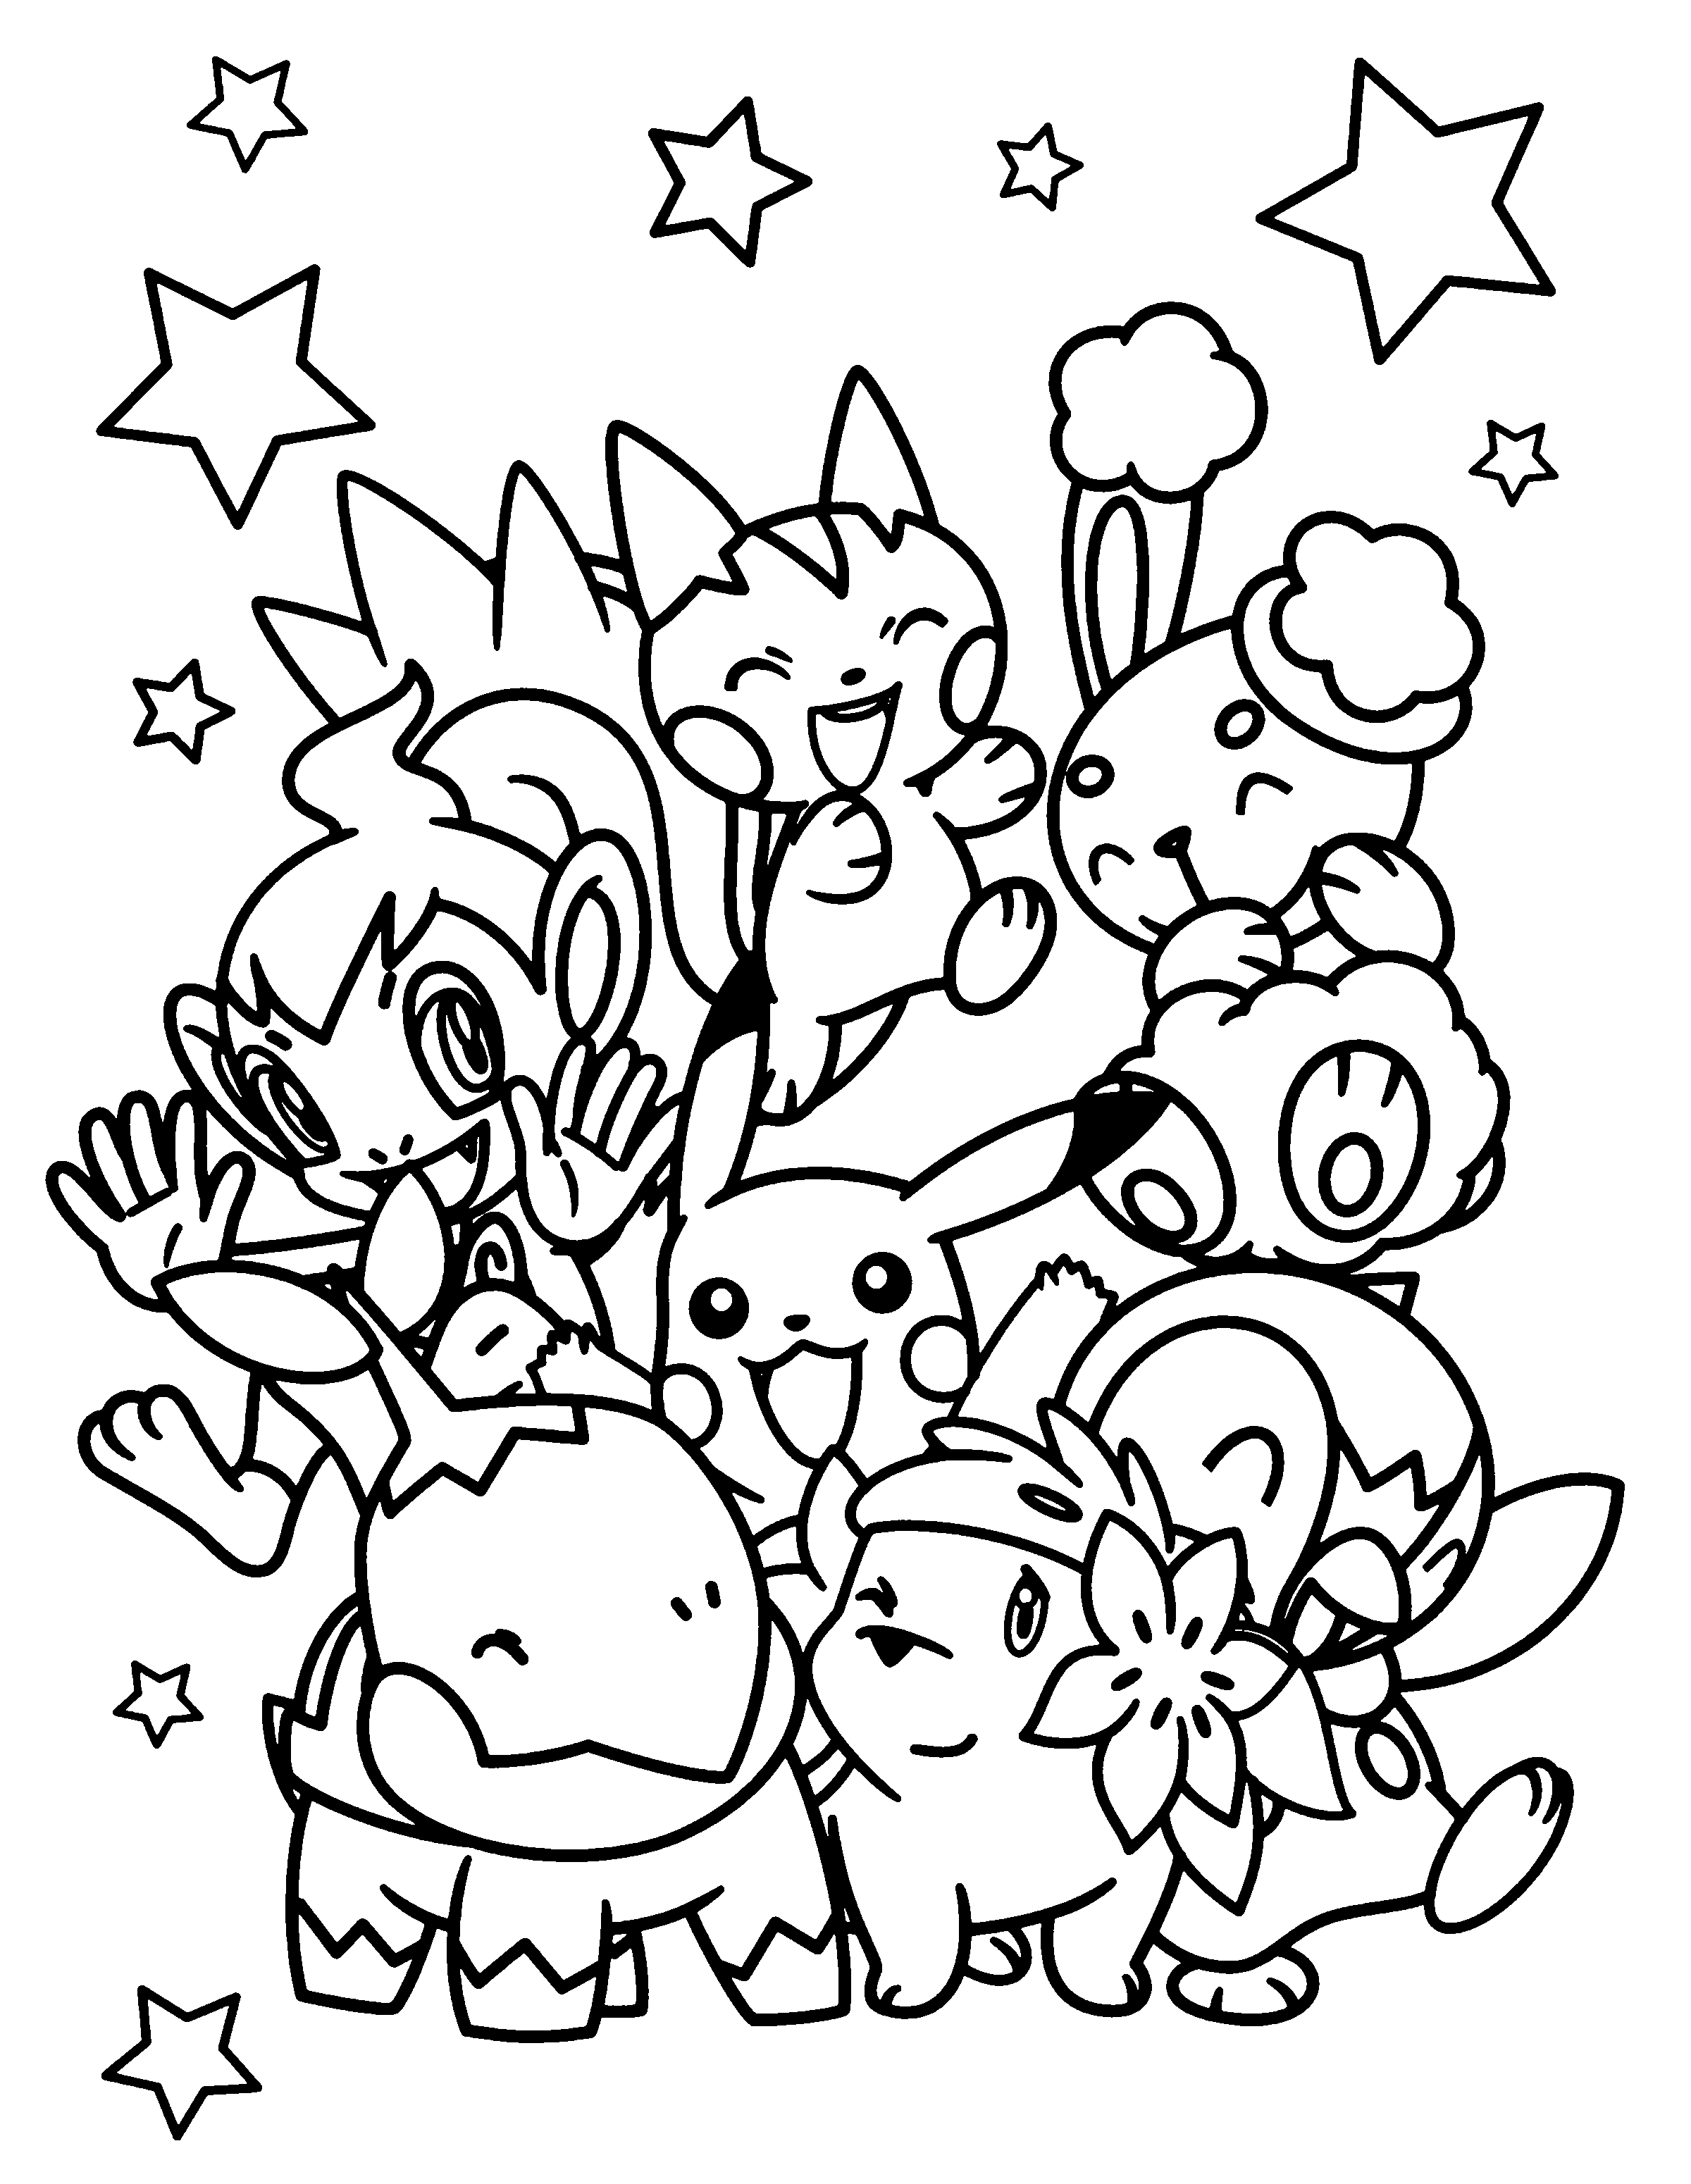 Pokemon 20 Coloring Pages   Coloring Cool